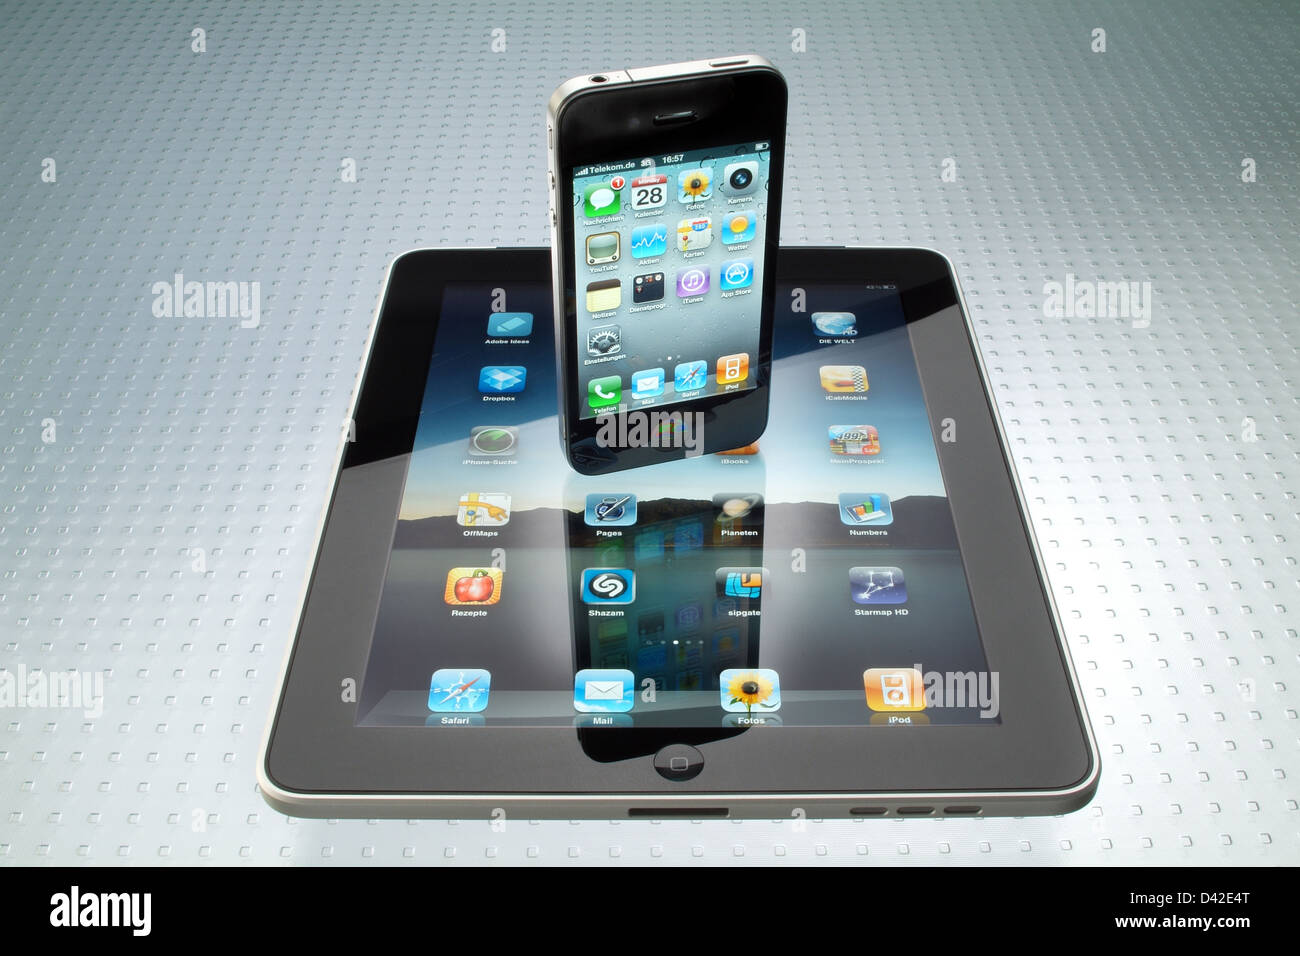 Hamburg, Germany, the iPad and the iPhone 4 from Apple Stock Photo - Alamy